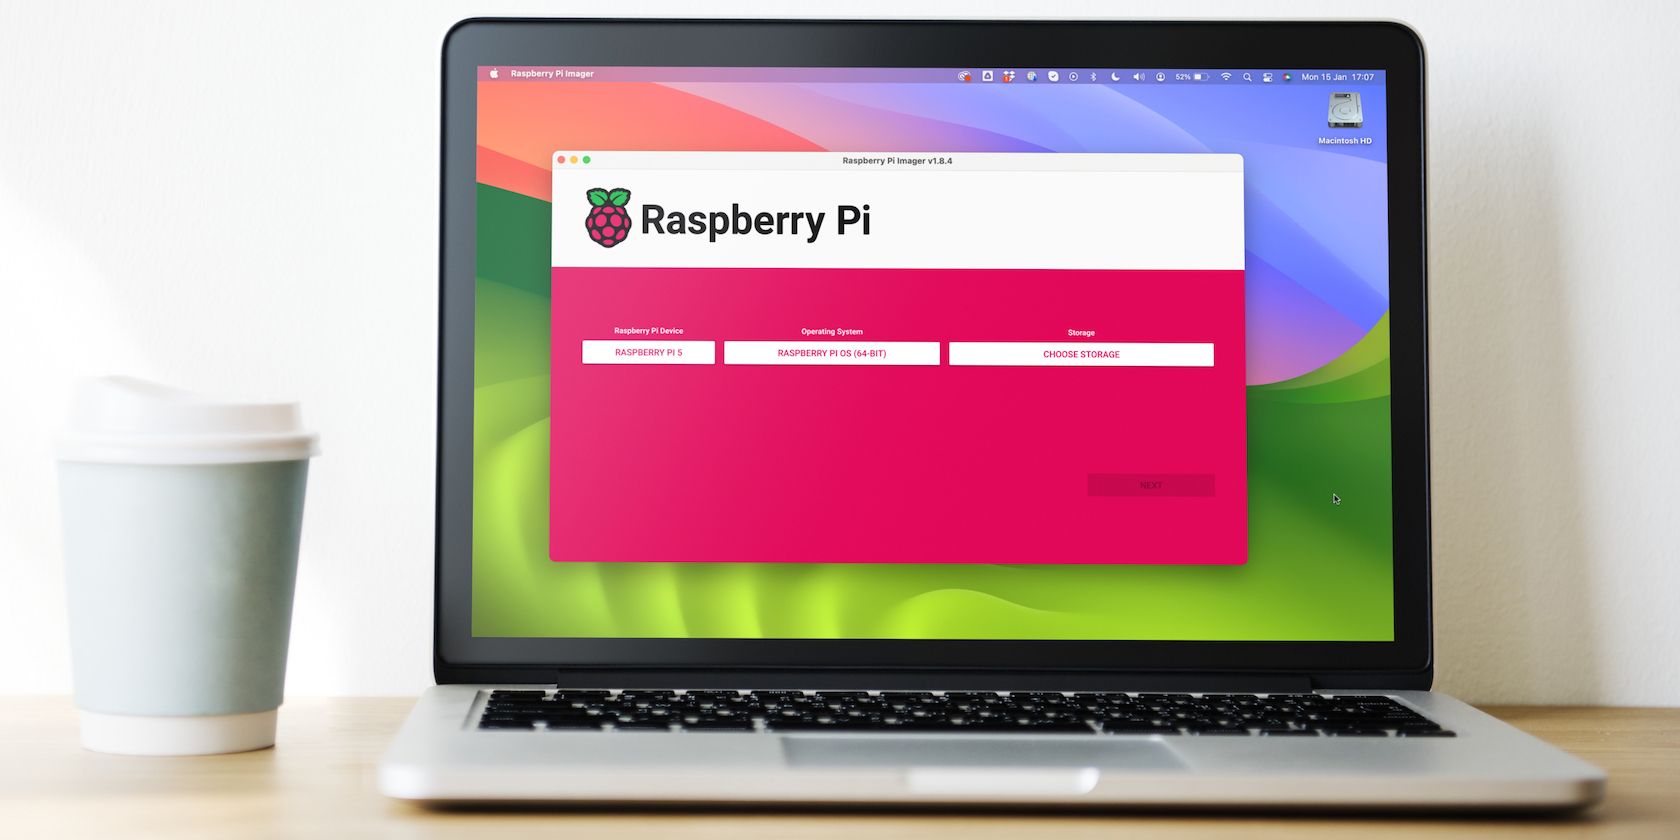 Raspberry Pi Imager running on a MacBook